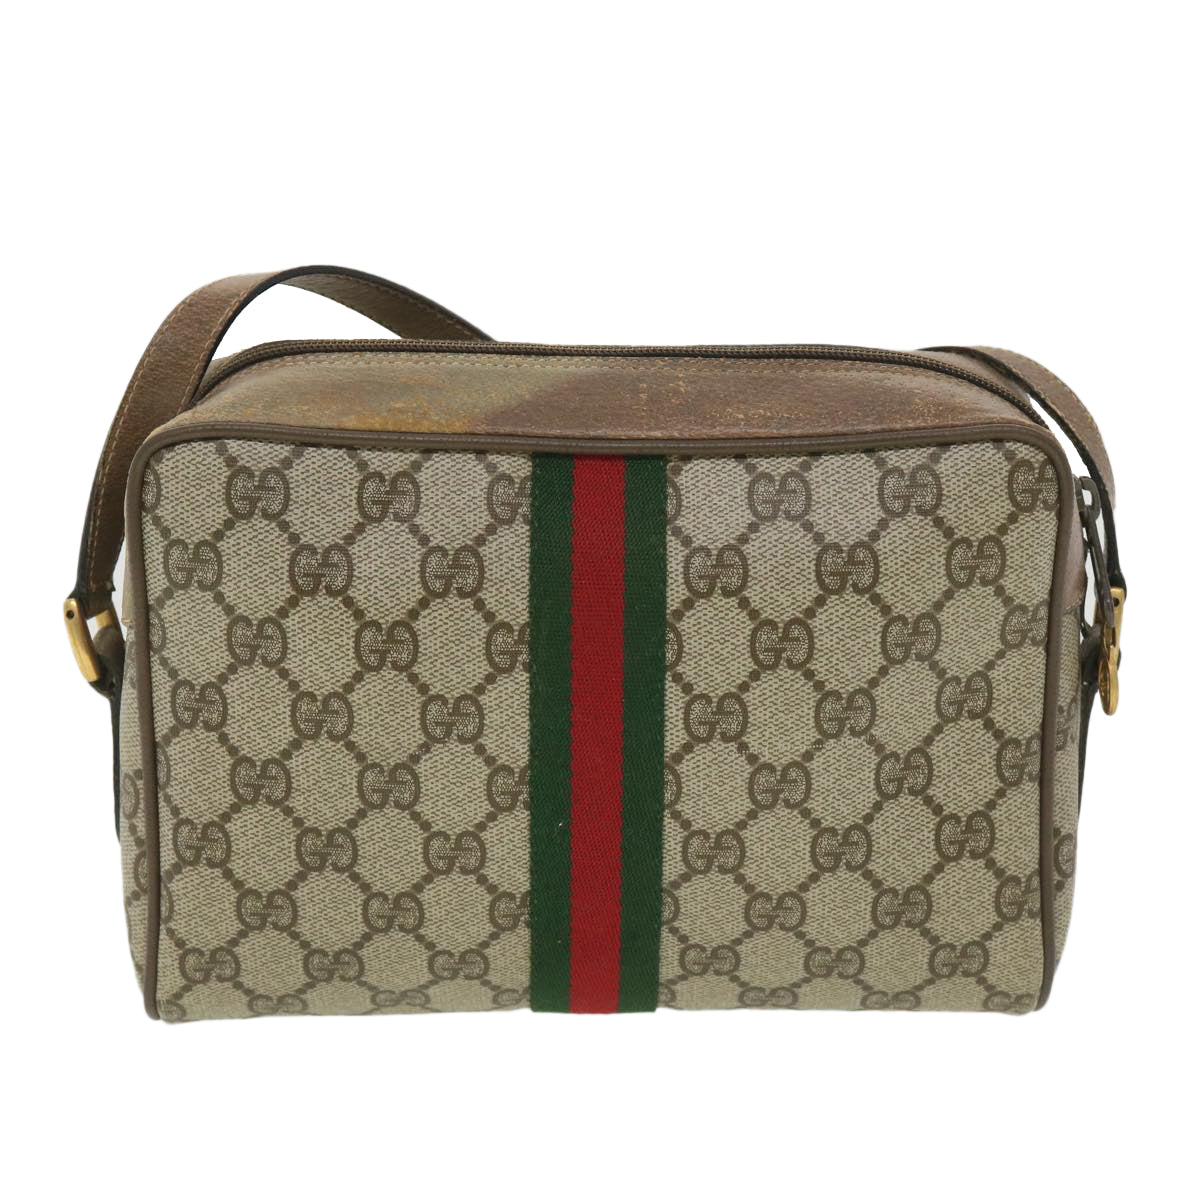 GUCCI GG Canvas Web Sherry Line Shoulder Bag Beige Red 98 02 004 Auth 38305 - 0